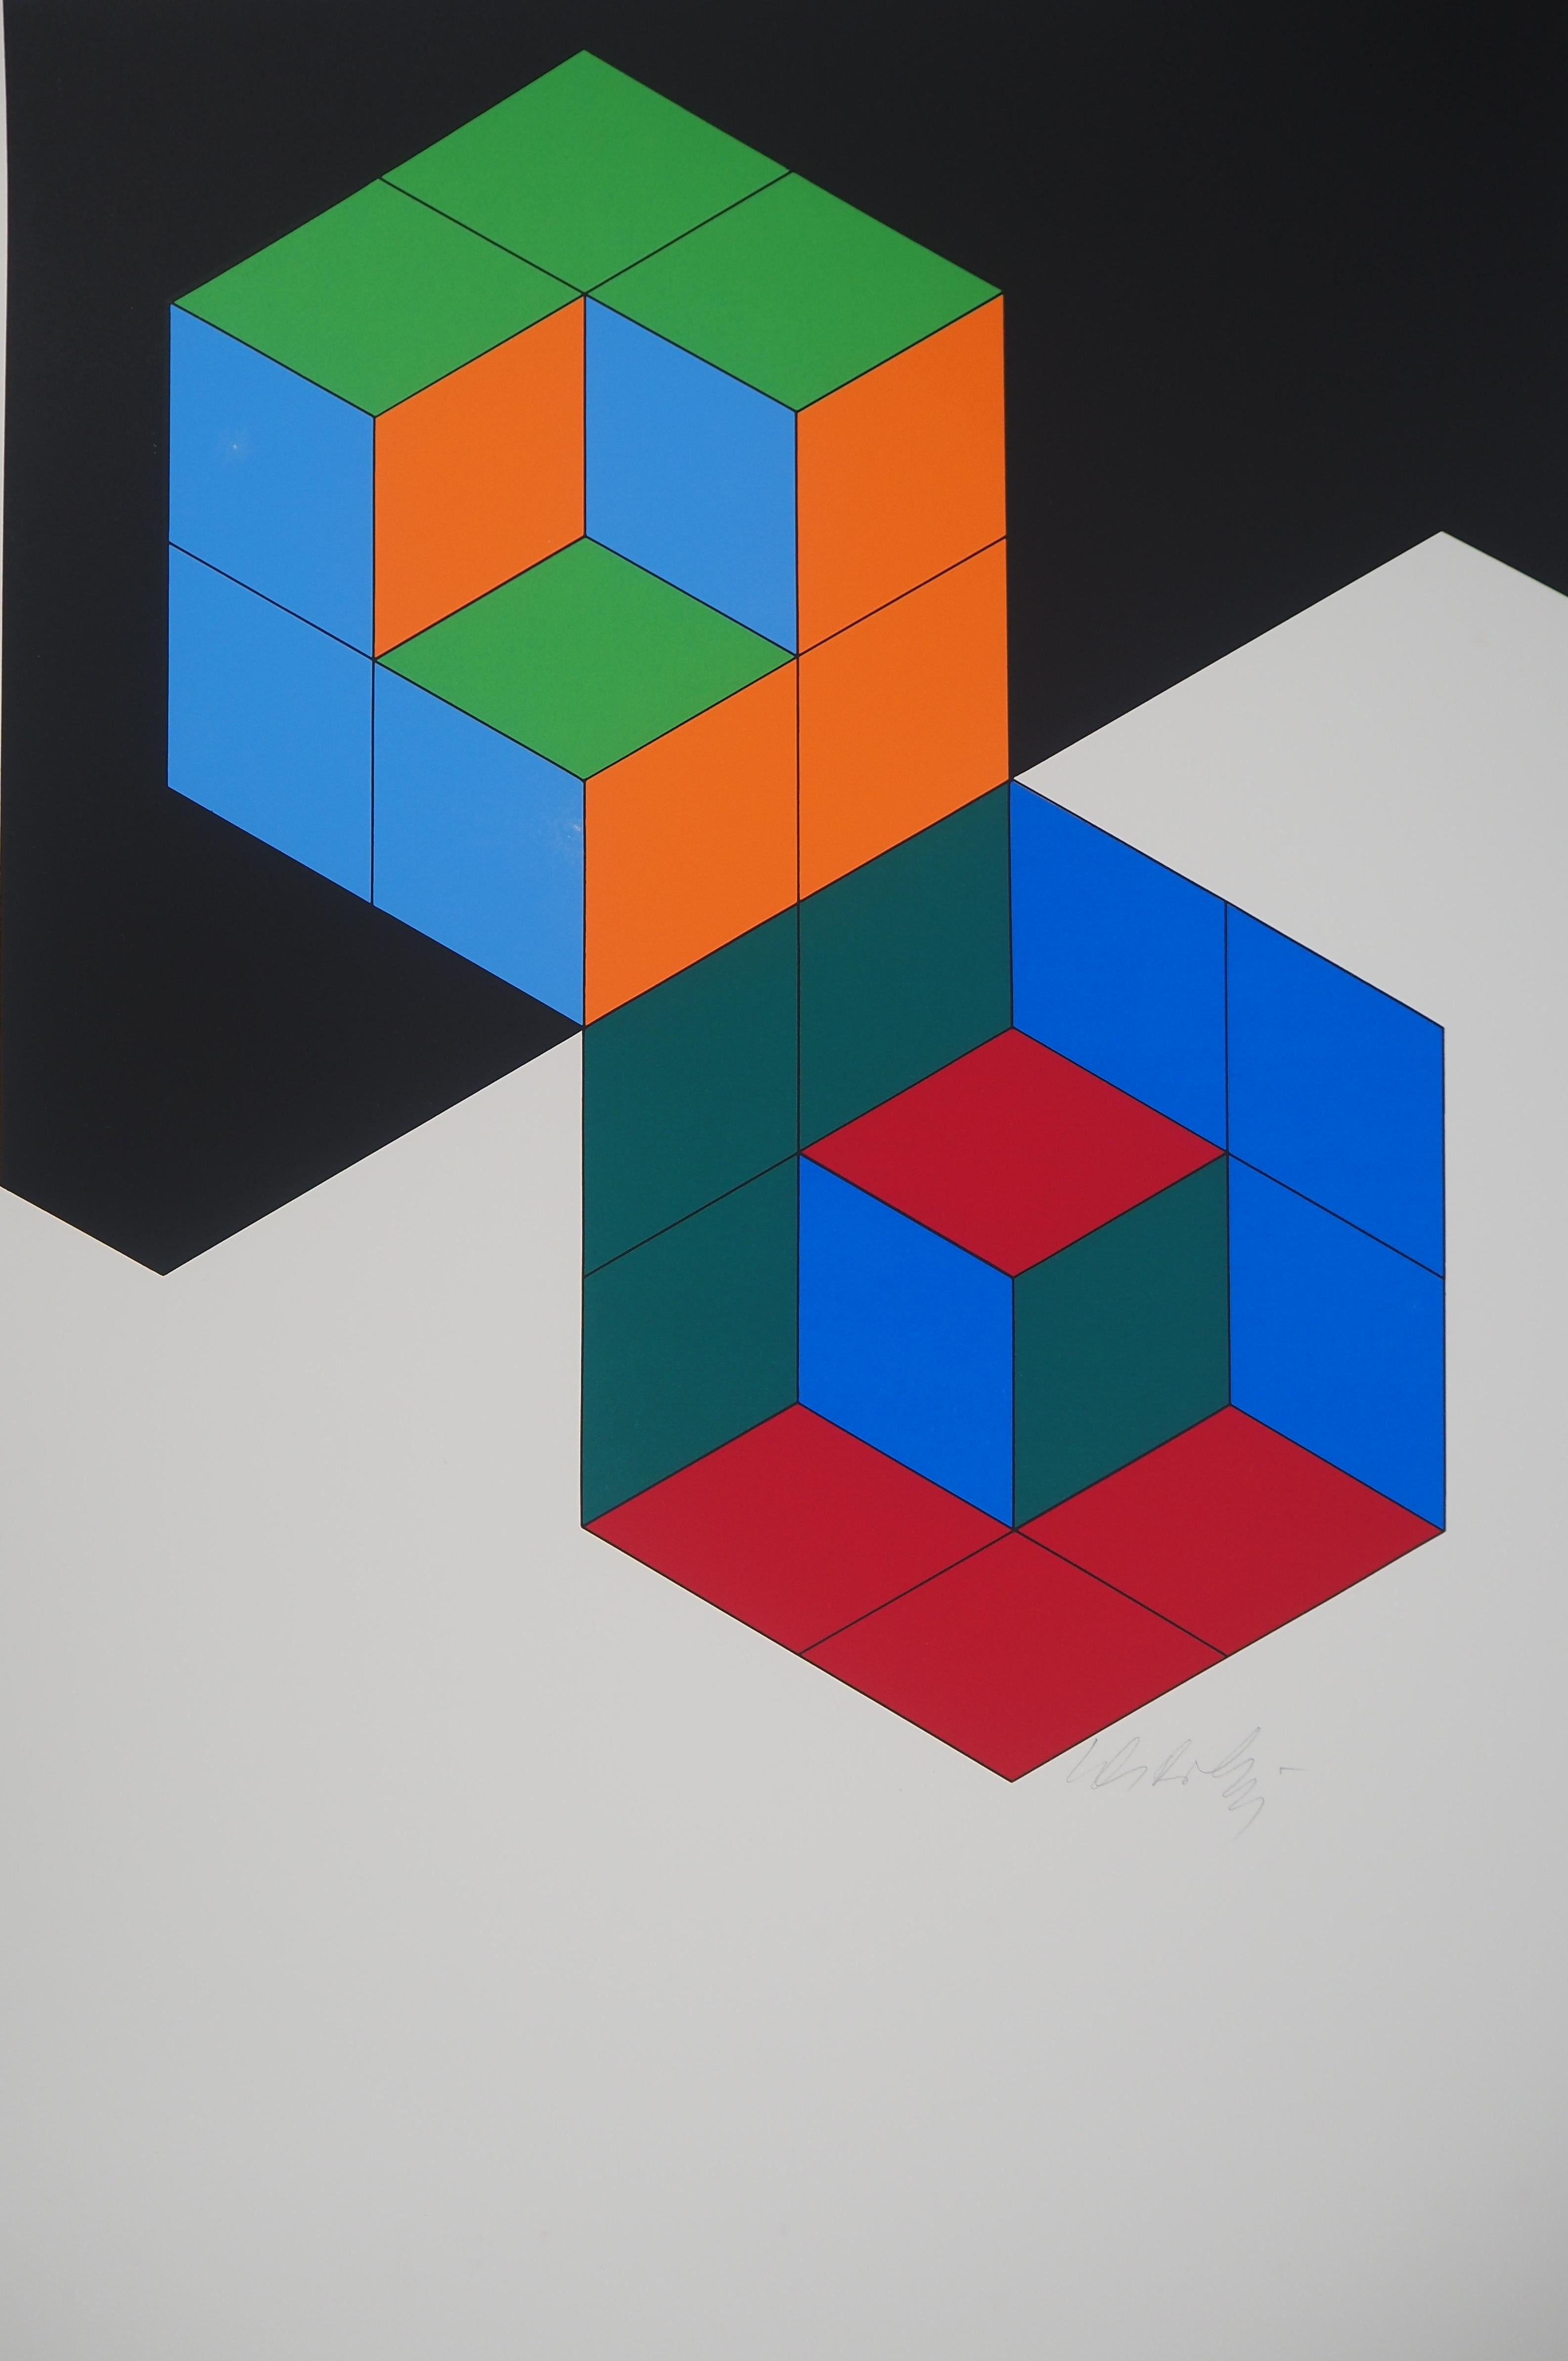 Victor Vasarely (1906-1997)
Kinetic Composition Bi-Hexa, 1975

Original Screen Print 
Handsigned in pencil 
Numbered / 300
On Arches vellum 76 x 56 cm (c. 30 x 22 in) 

REFERENCE : Catalog raisonne Benavides #732

Very good condition, small foxing